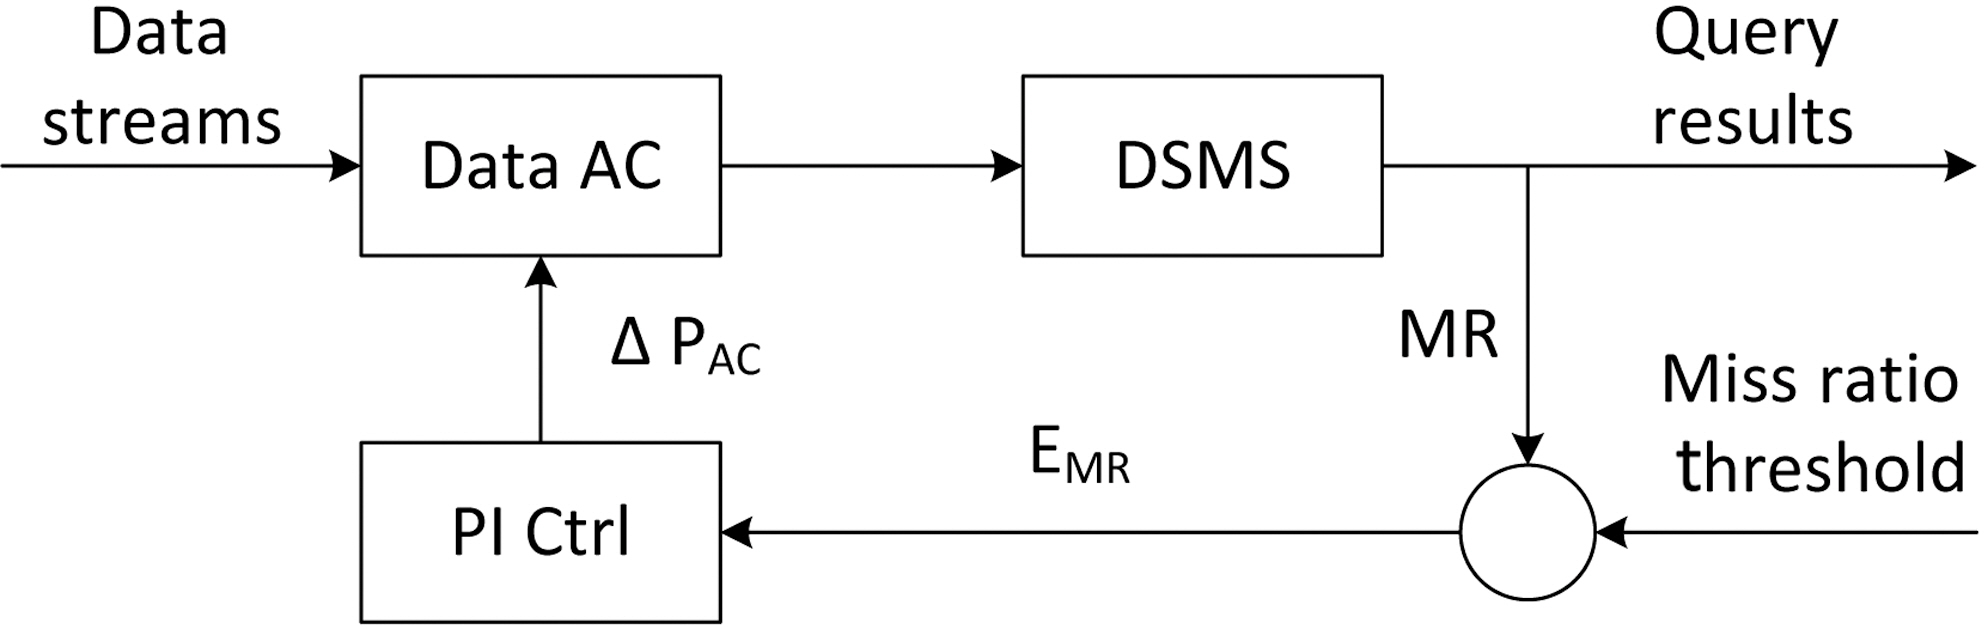 A data admission controller. DSMS: data stream management system.